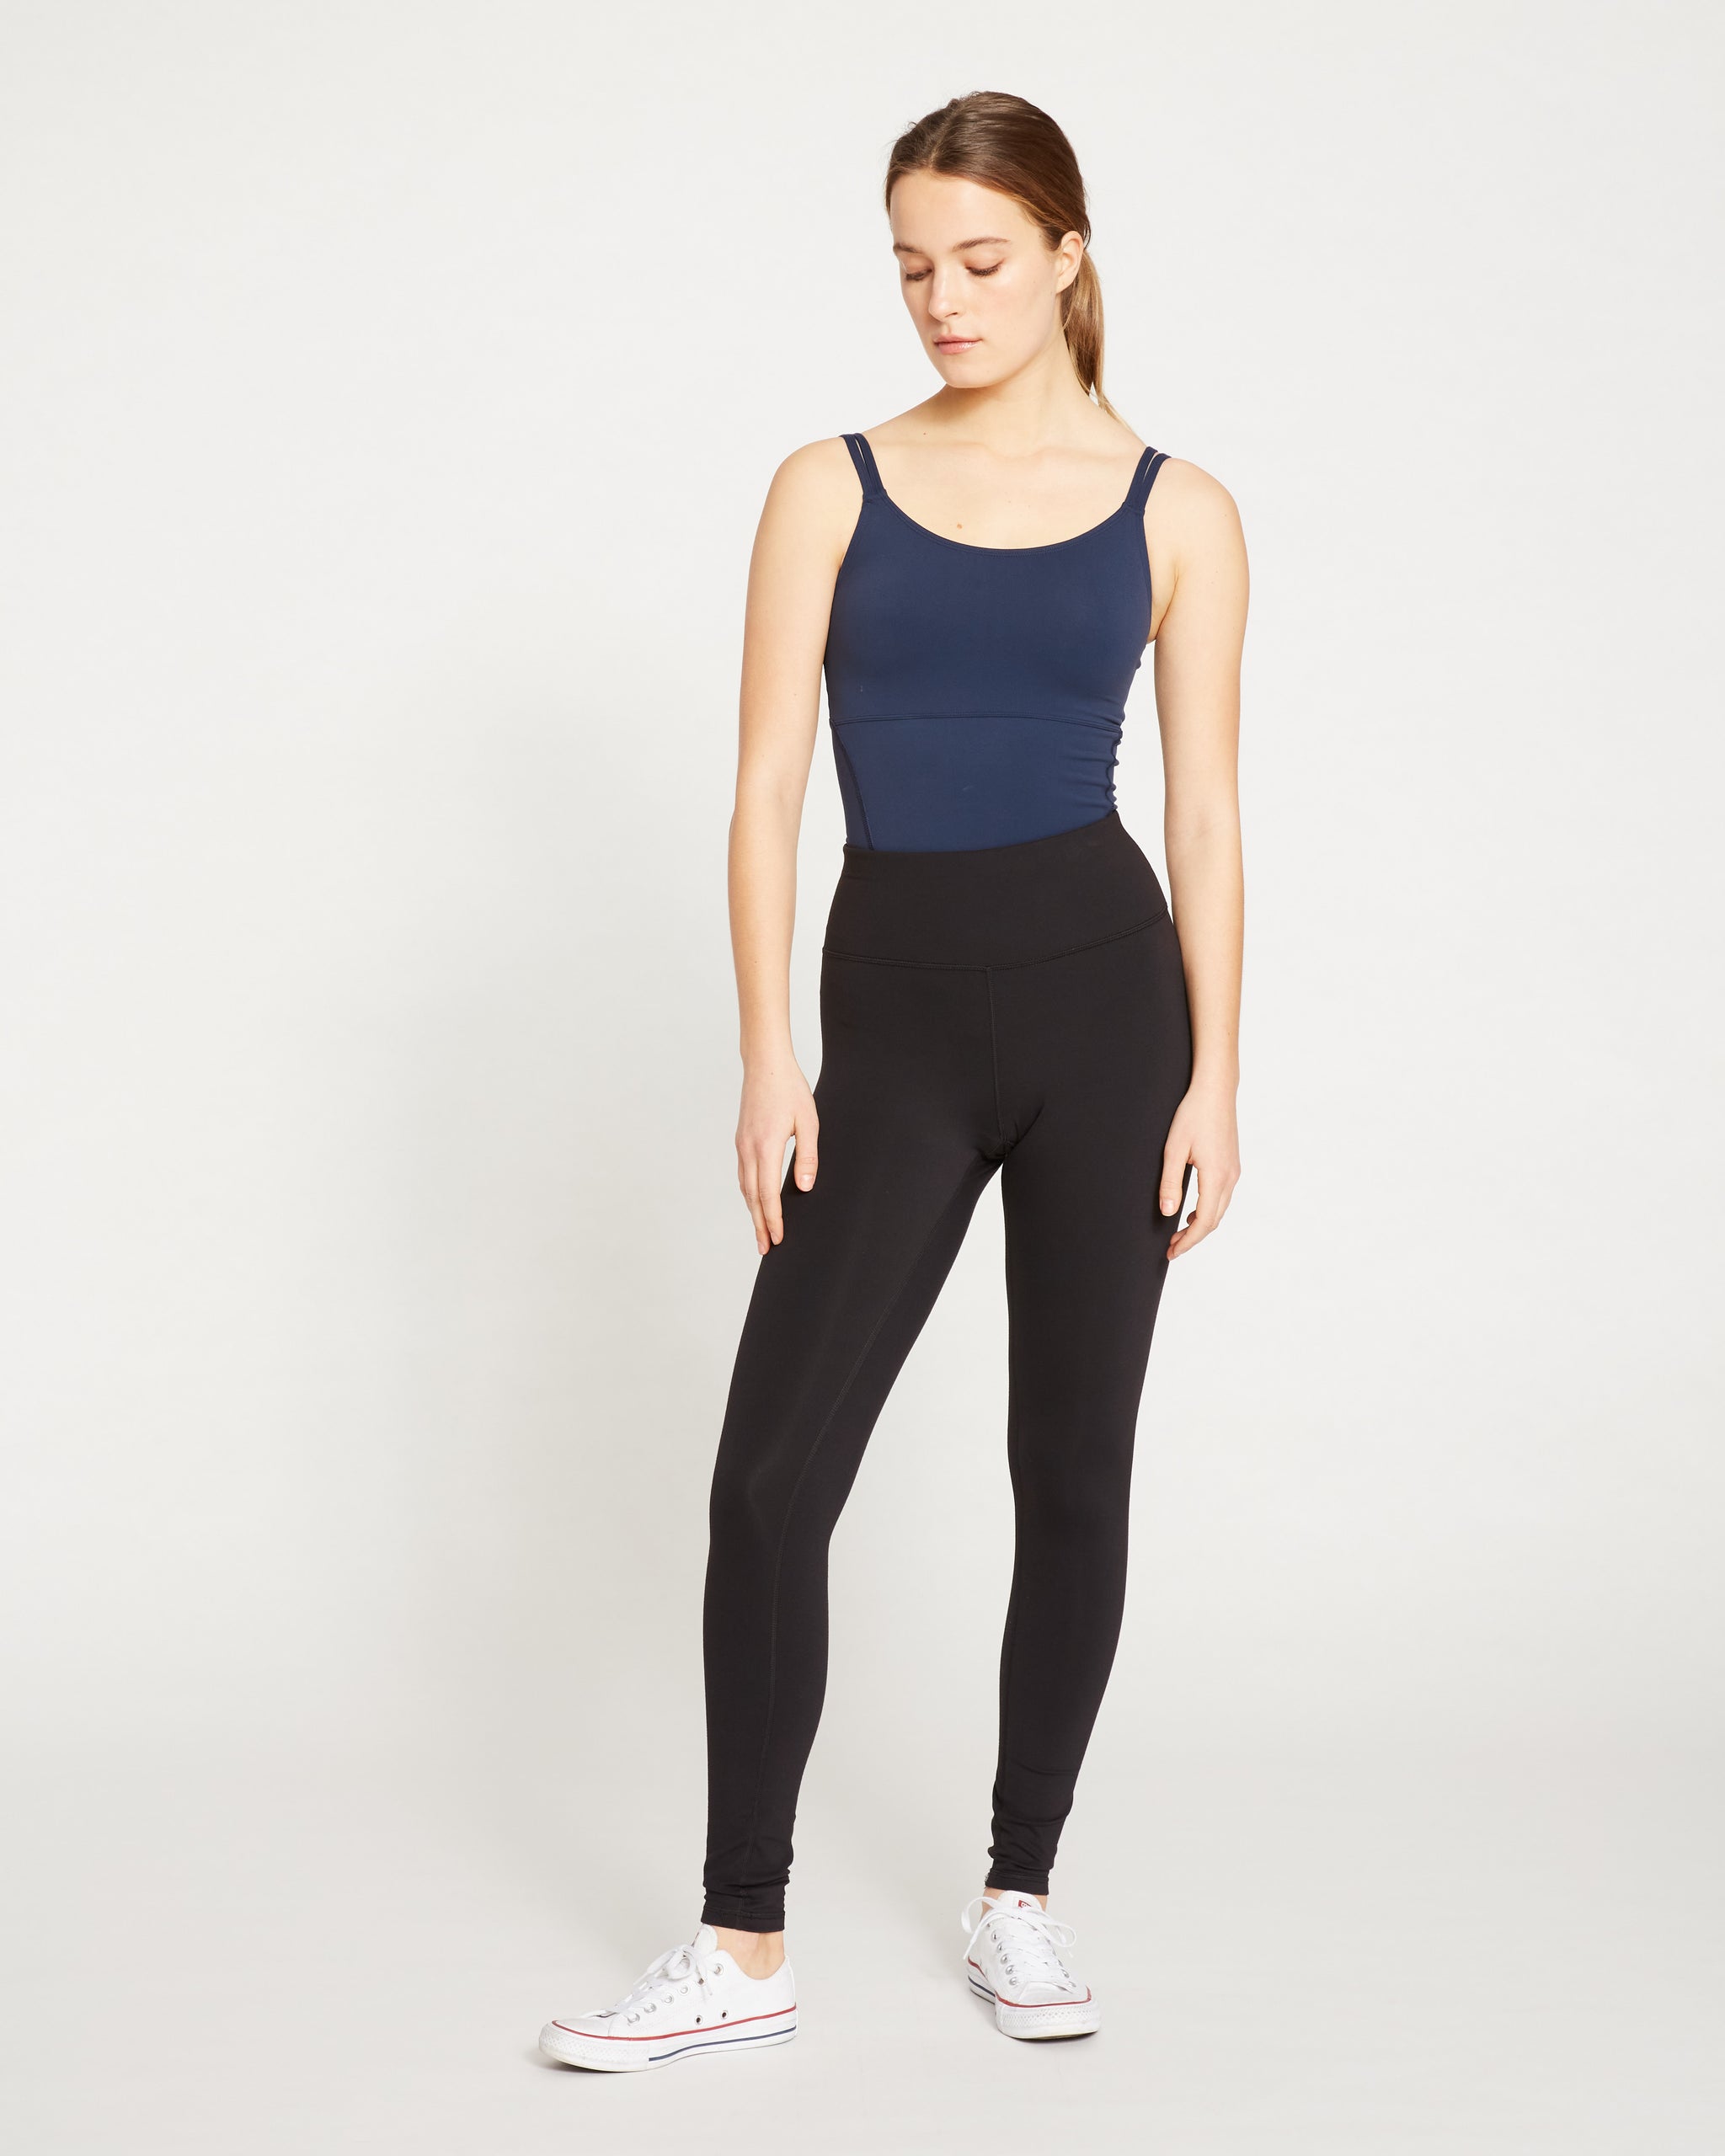 Woman's legging/yoga pants with pockets, Women's Fashion, Activewear on  Carousell